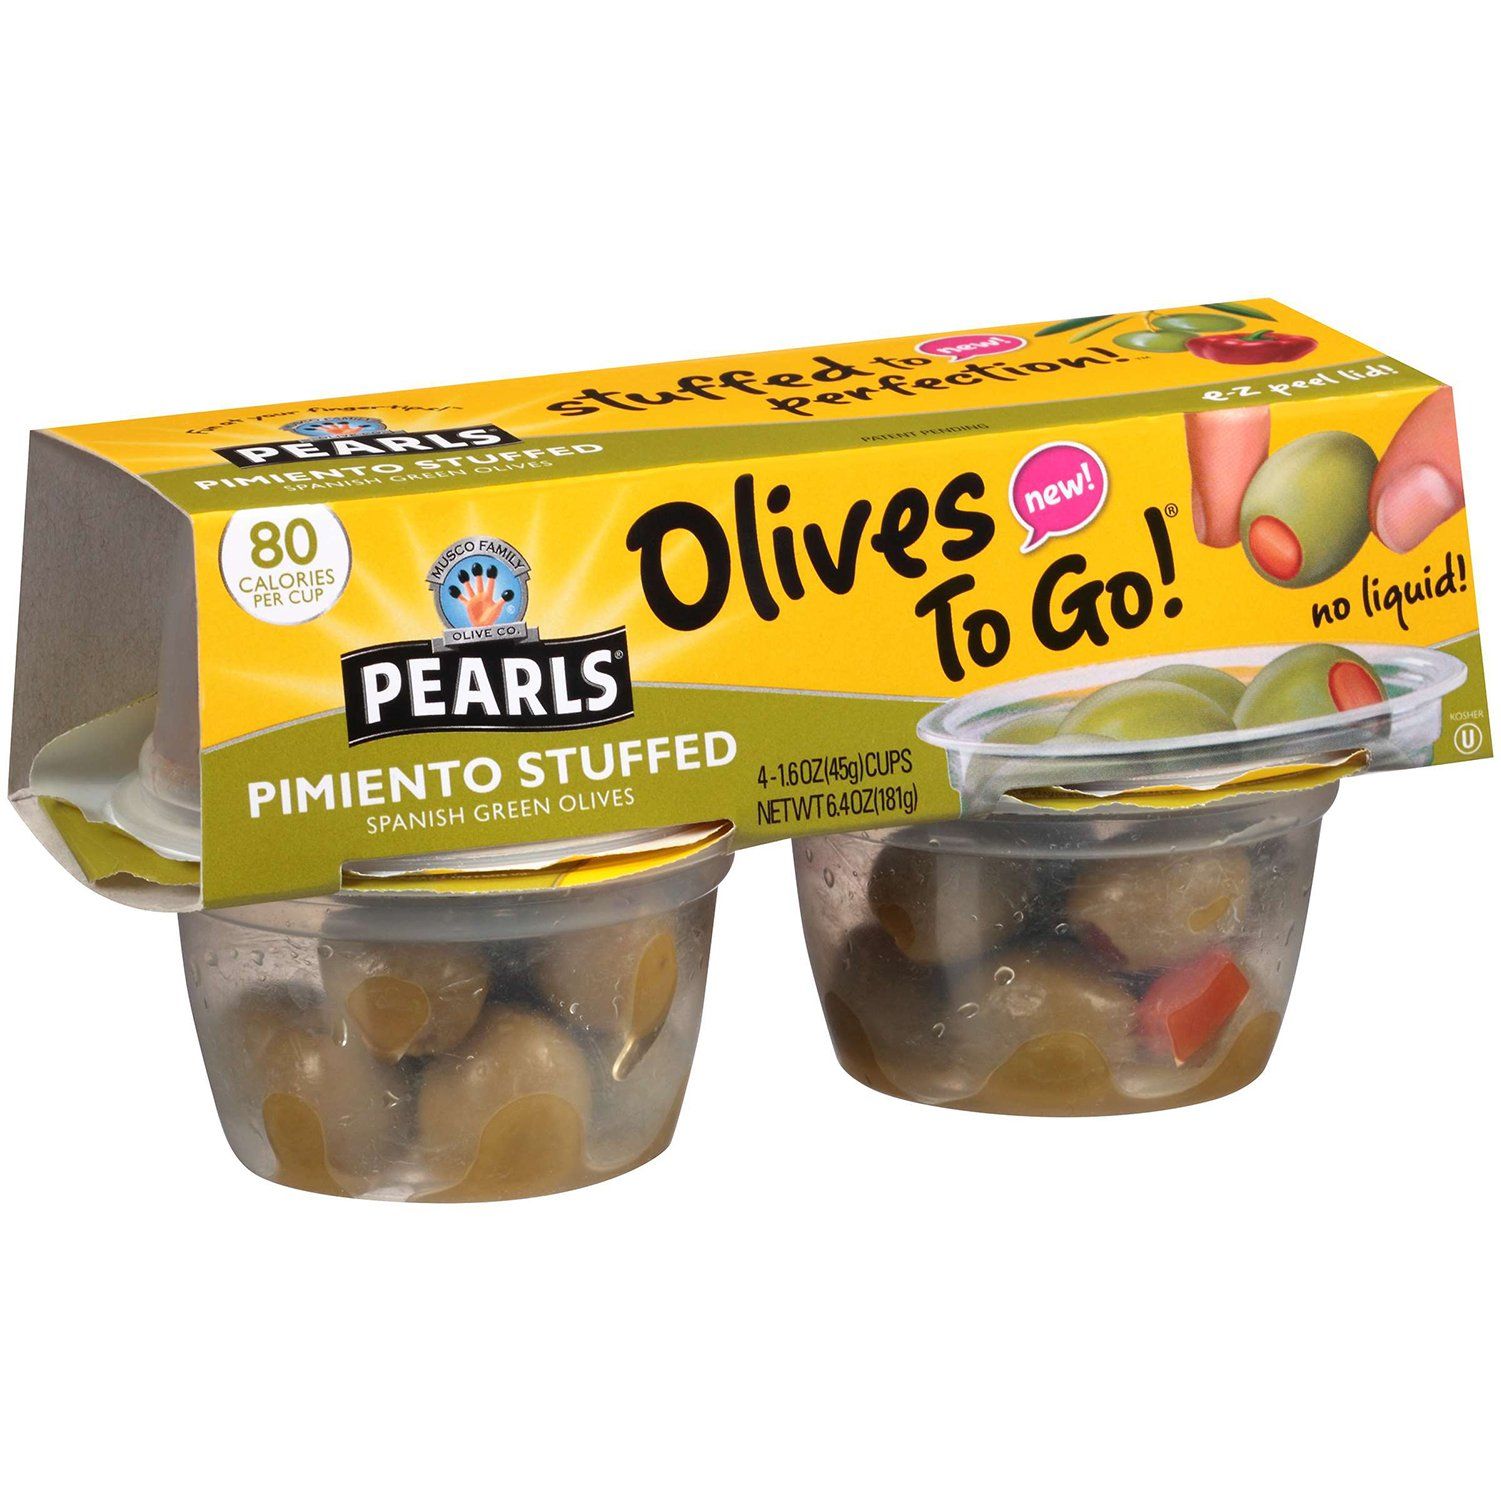 Pearls Olives To Go Cups Pearls Pimiento Stuffed 1.6 Oz-4 Count 